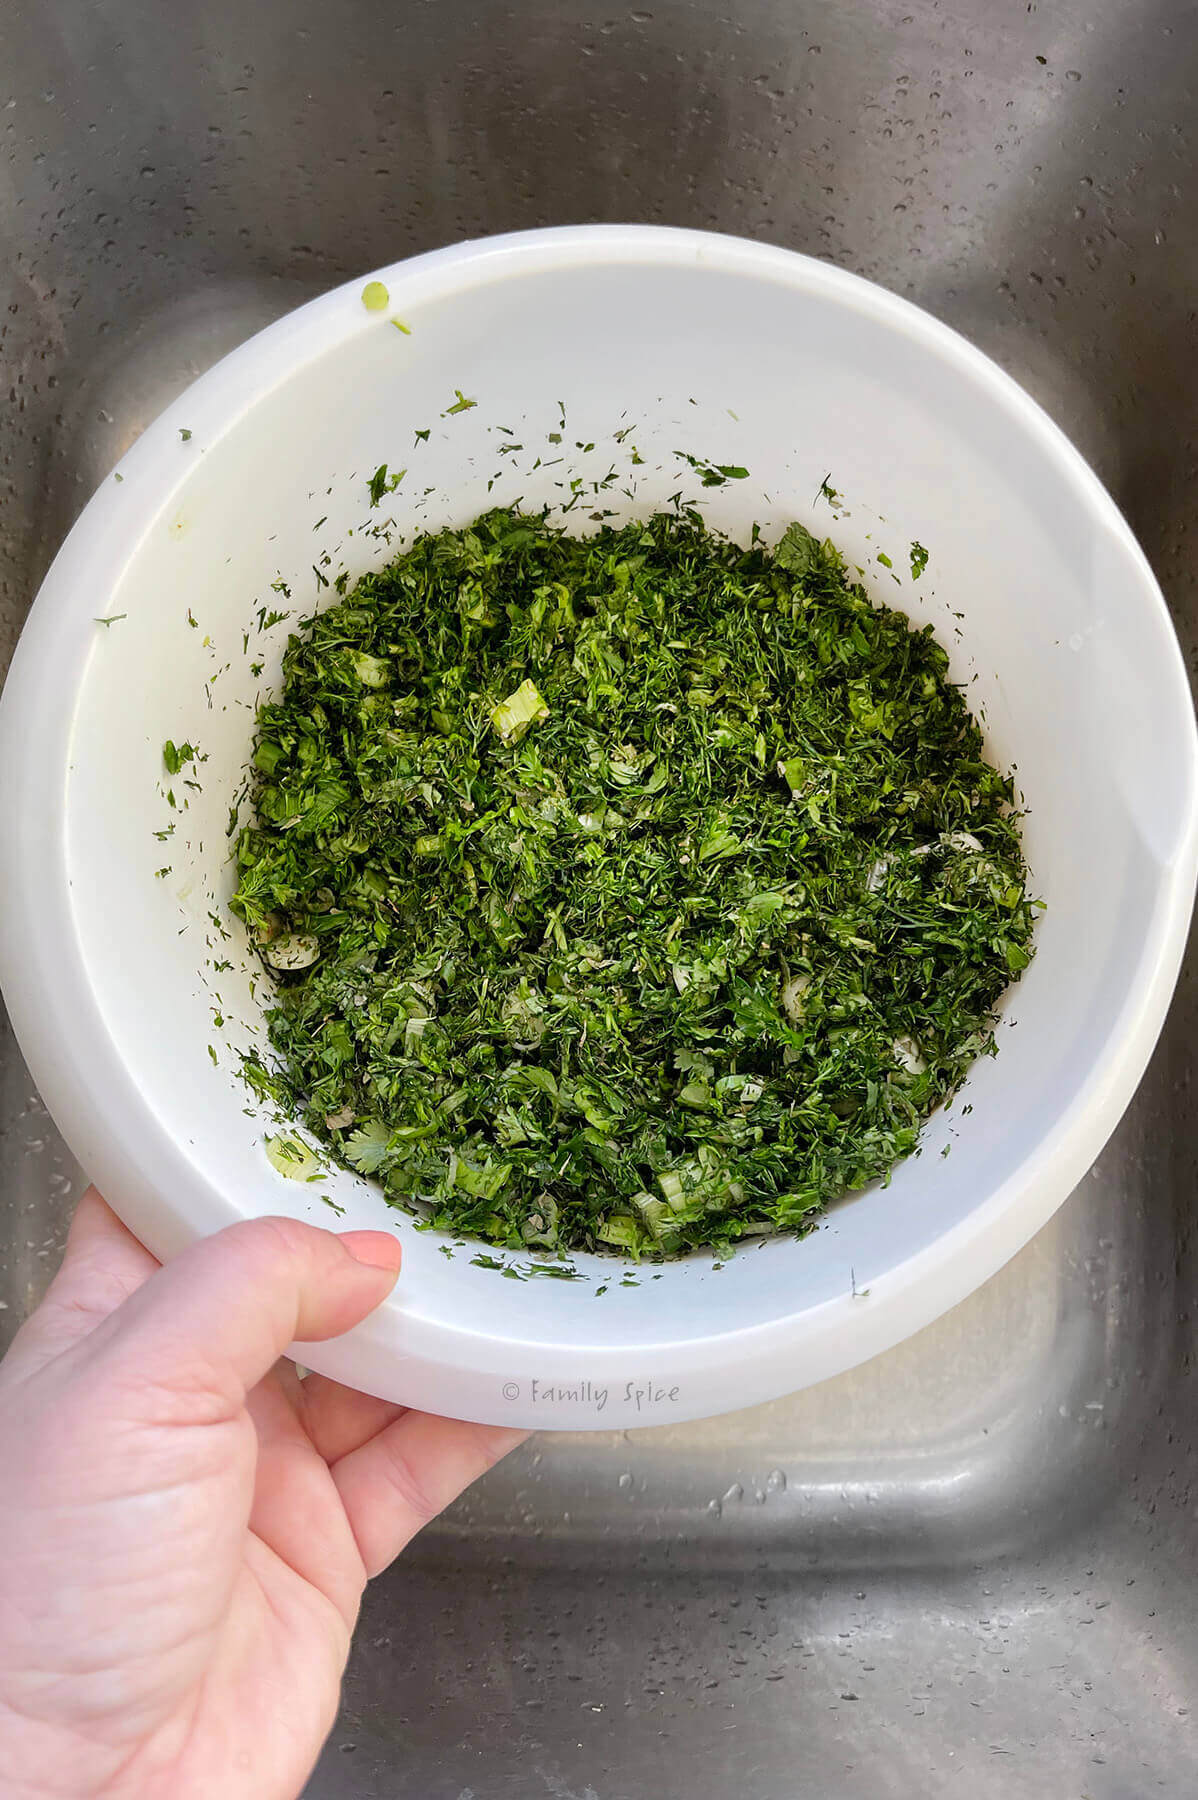 A hand holding a white bowl with chopped herbs in it